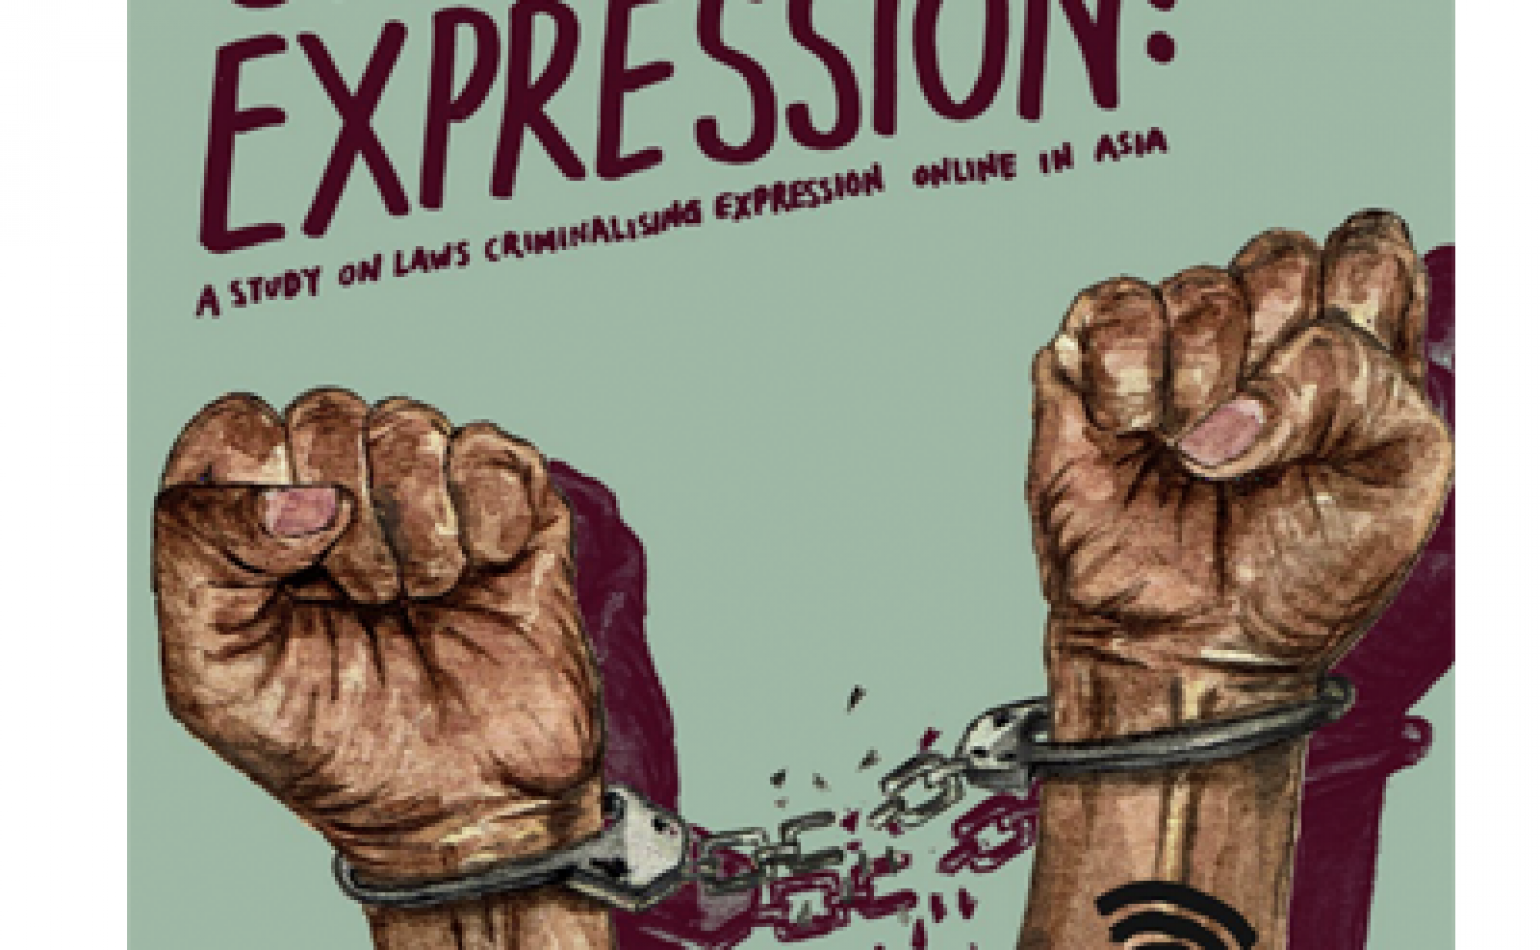 UNSHACKLING EXPRESSION: a study on laws criminalising expression online in Asia